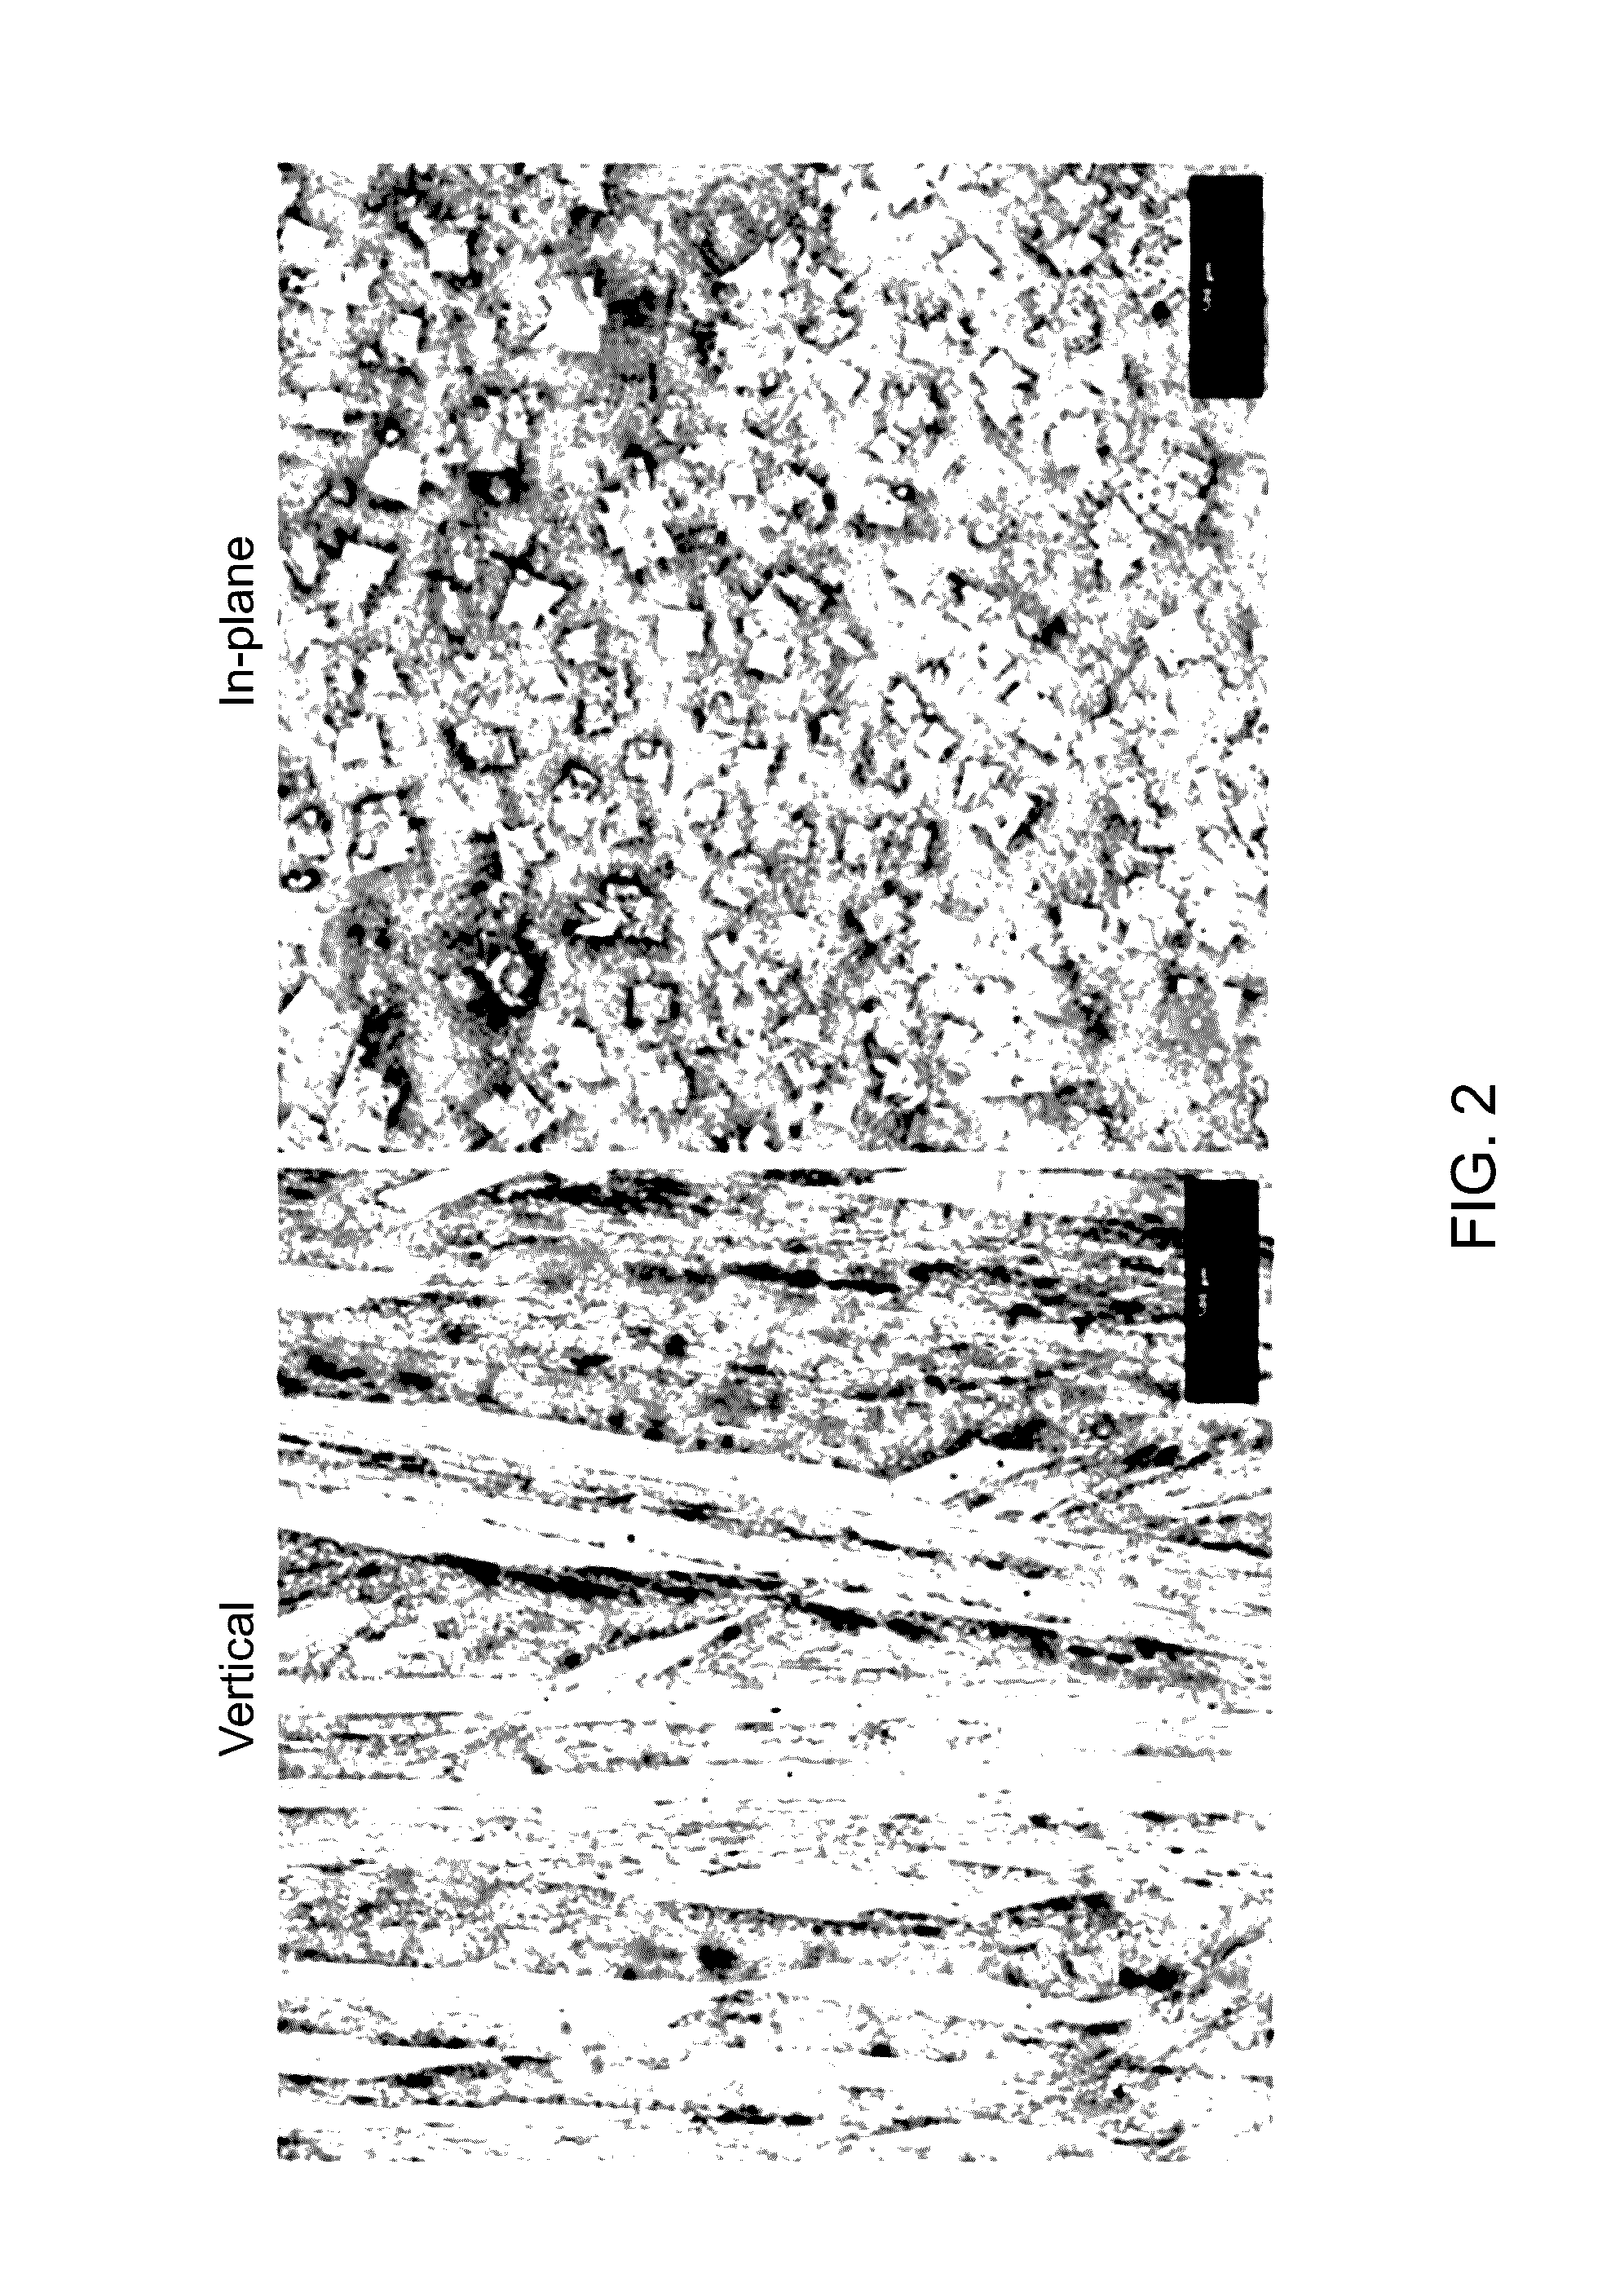 Cobalt, iron, boron, and/or nickel alloy-containing articles and methods for making same